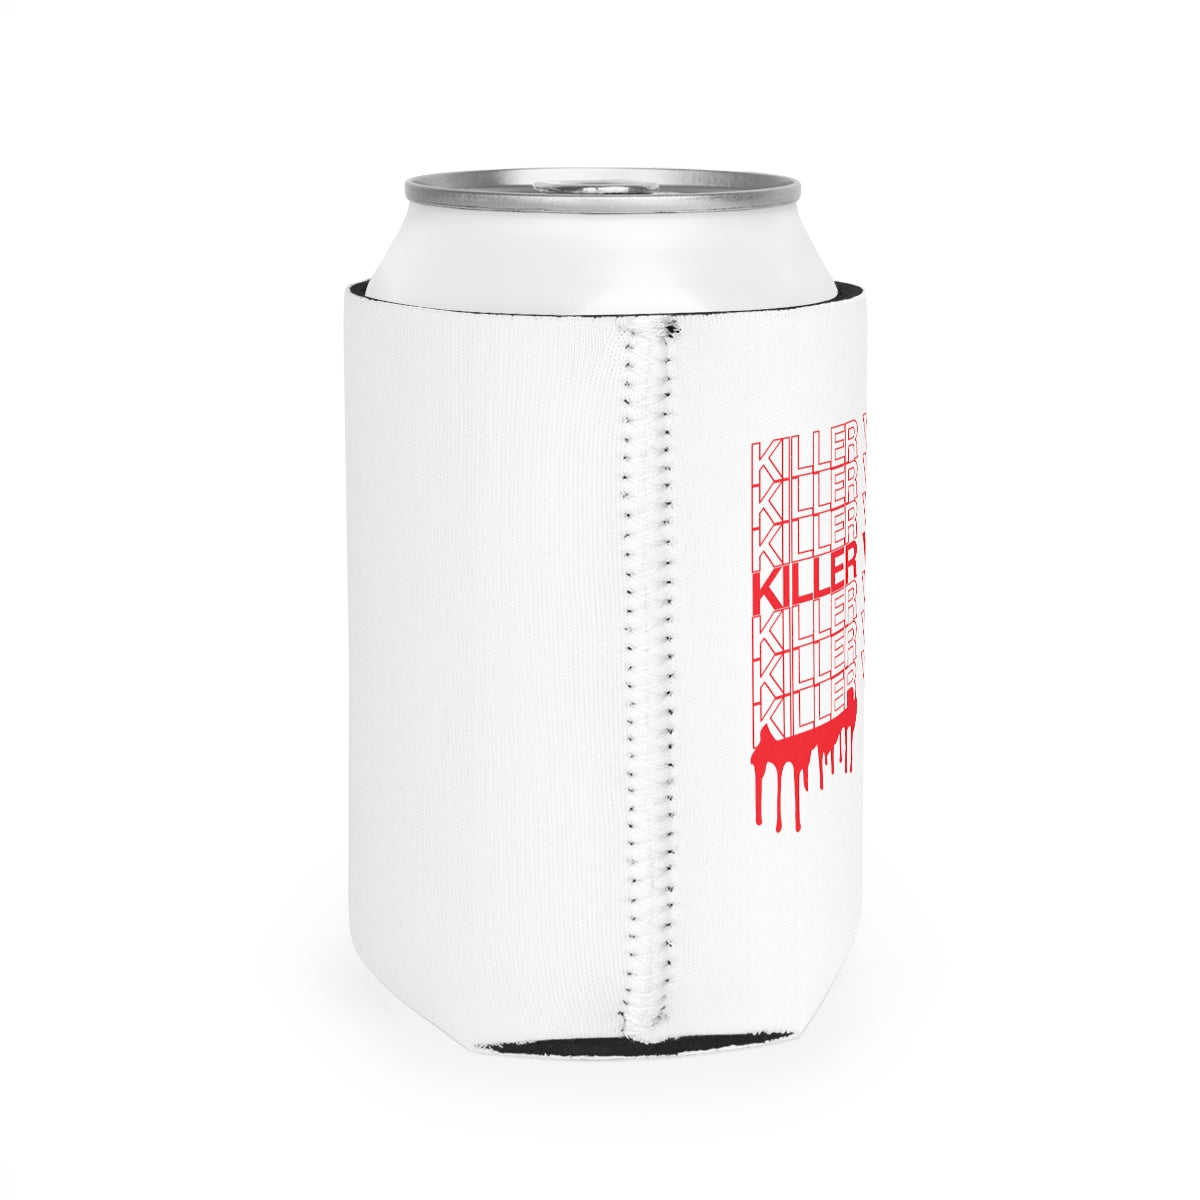 Killer Vibes Only | Have a Nice Day | Koozie